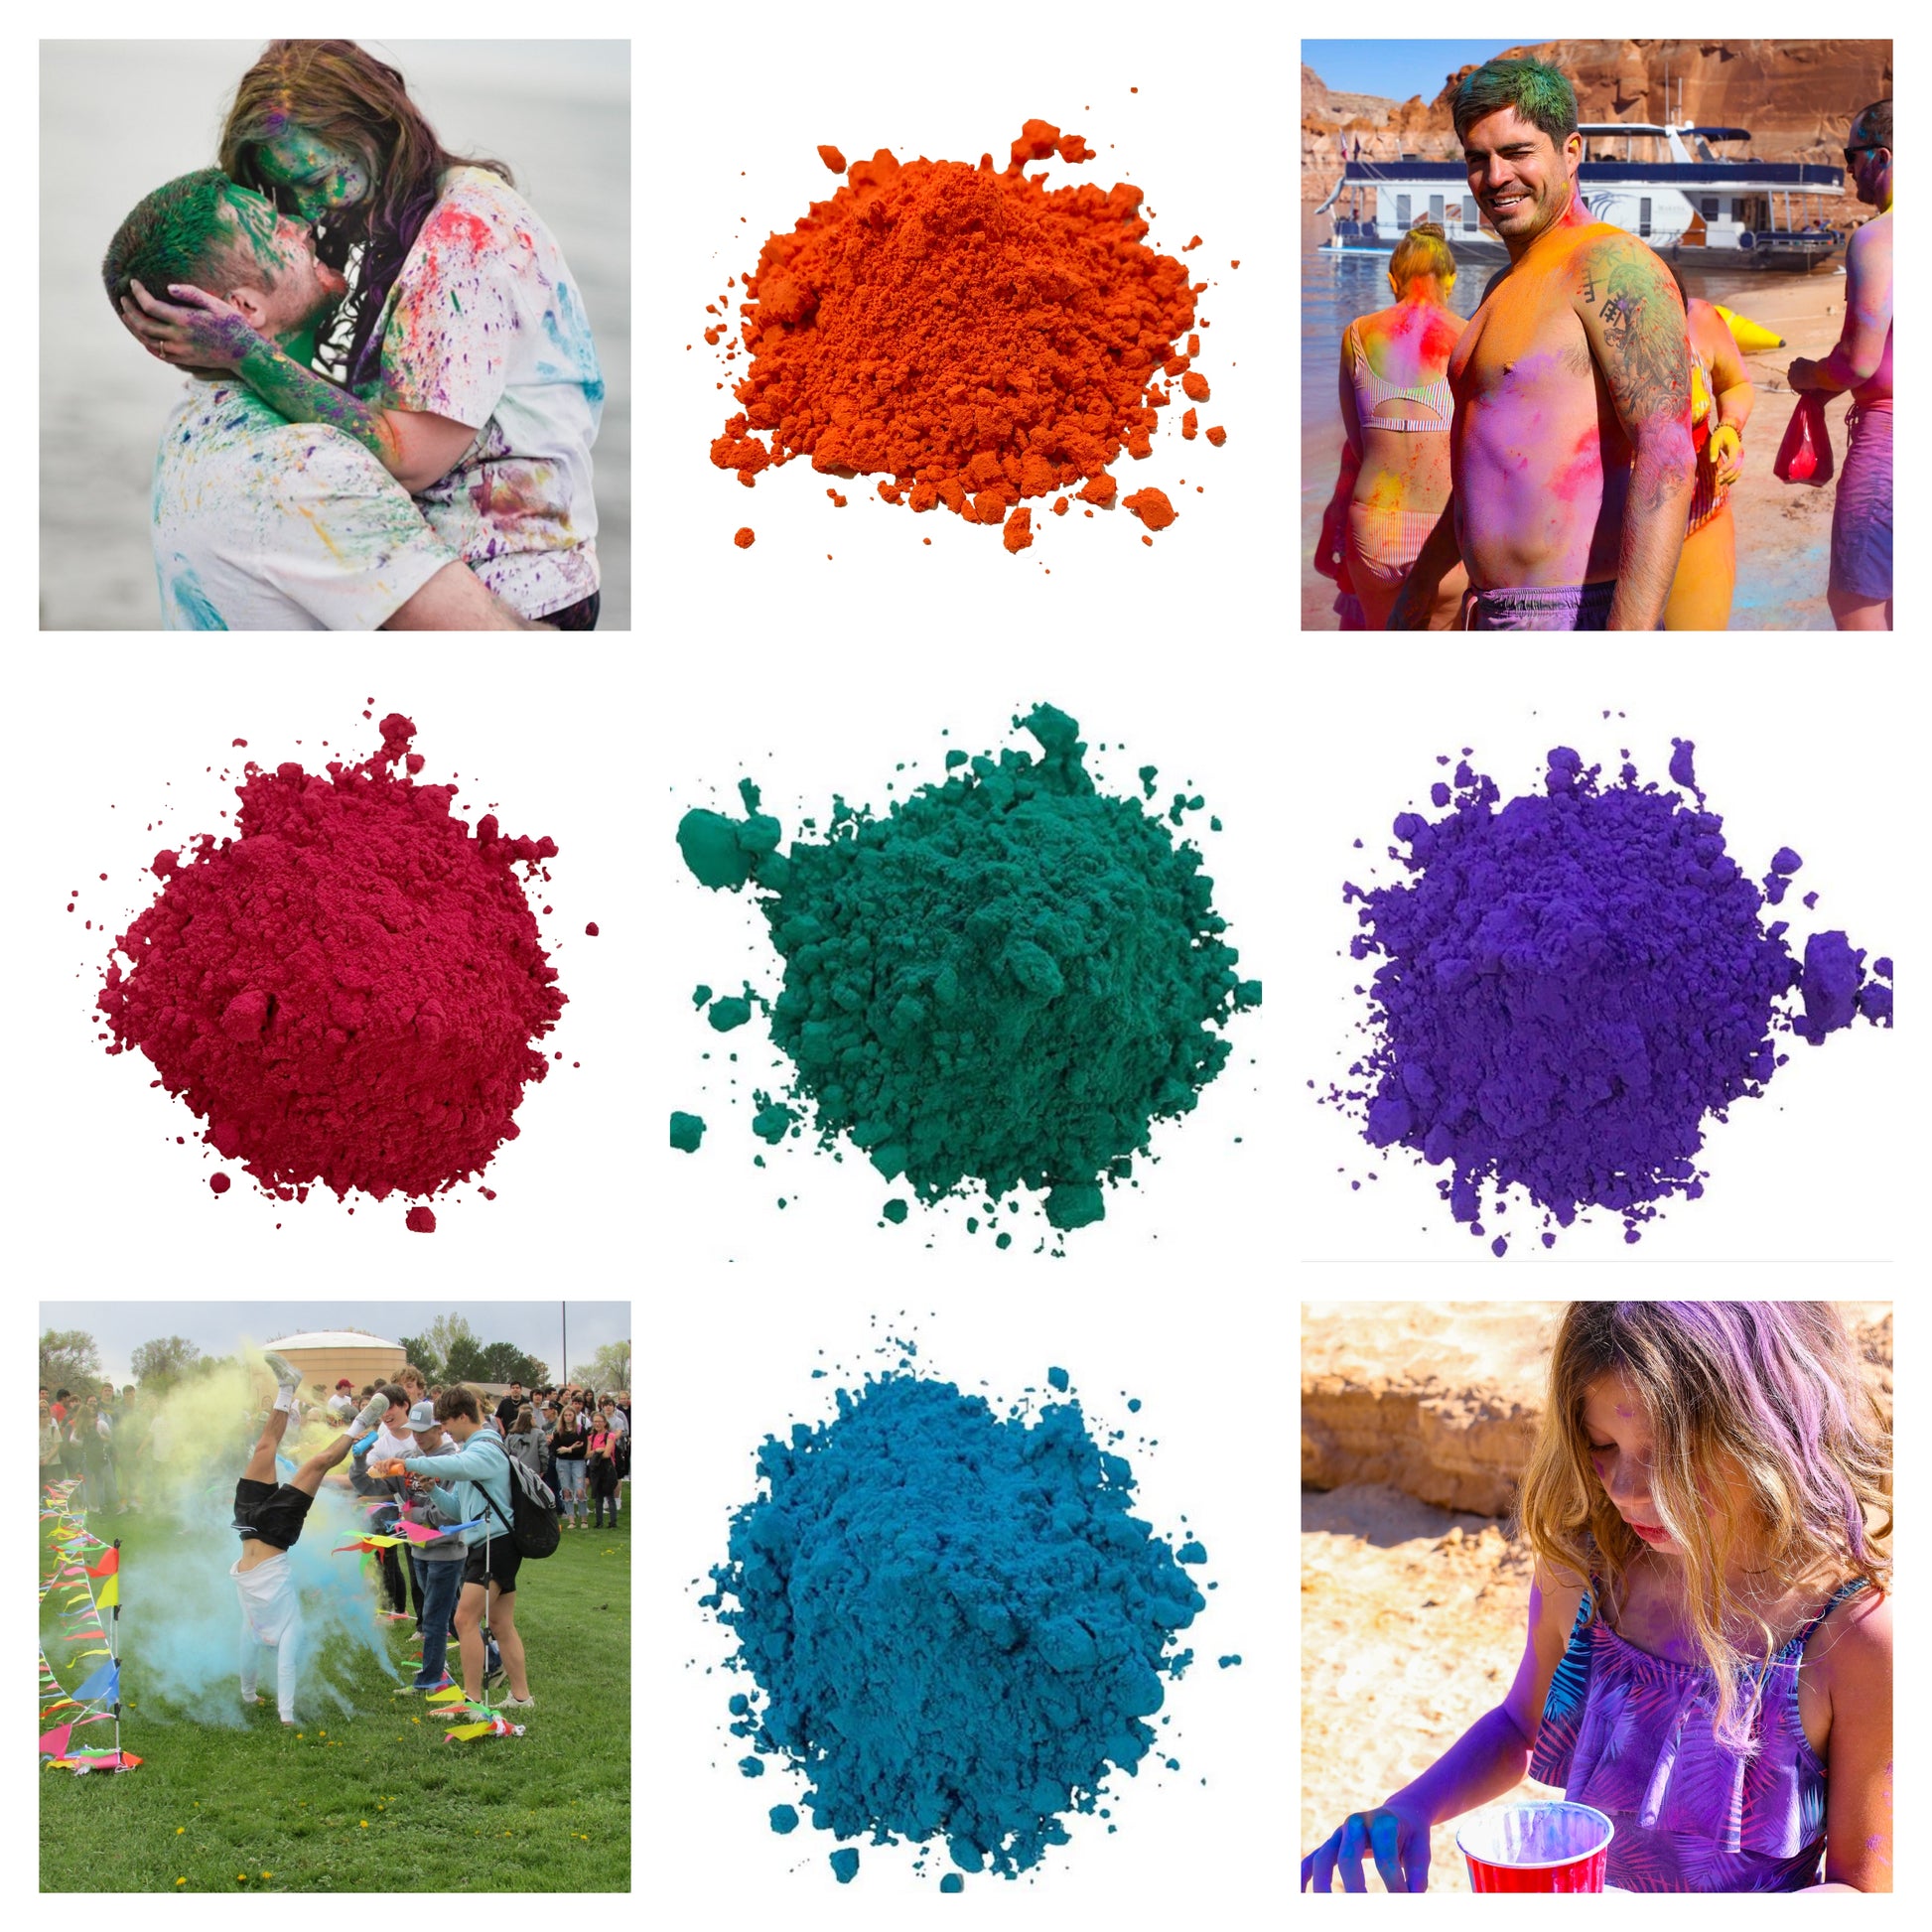 What do the Different Holi Powder Colors Mean? – Peacock Powder